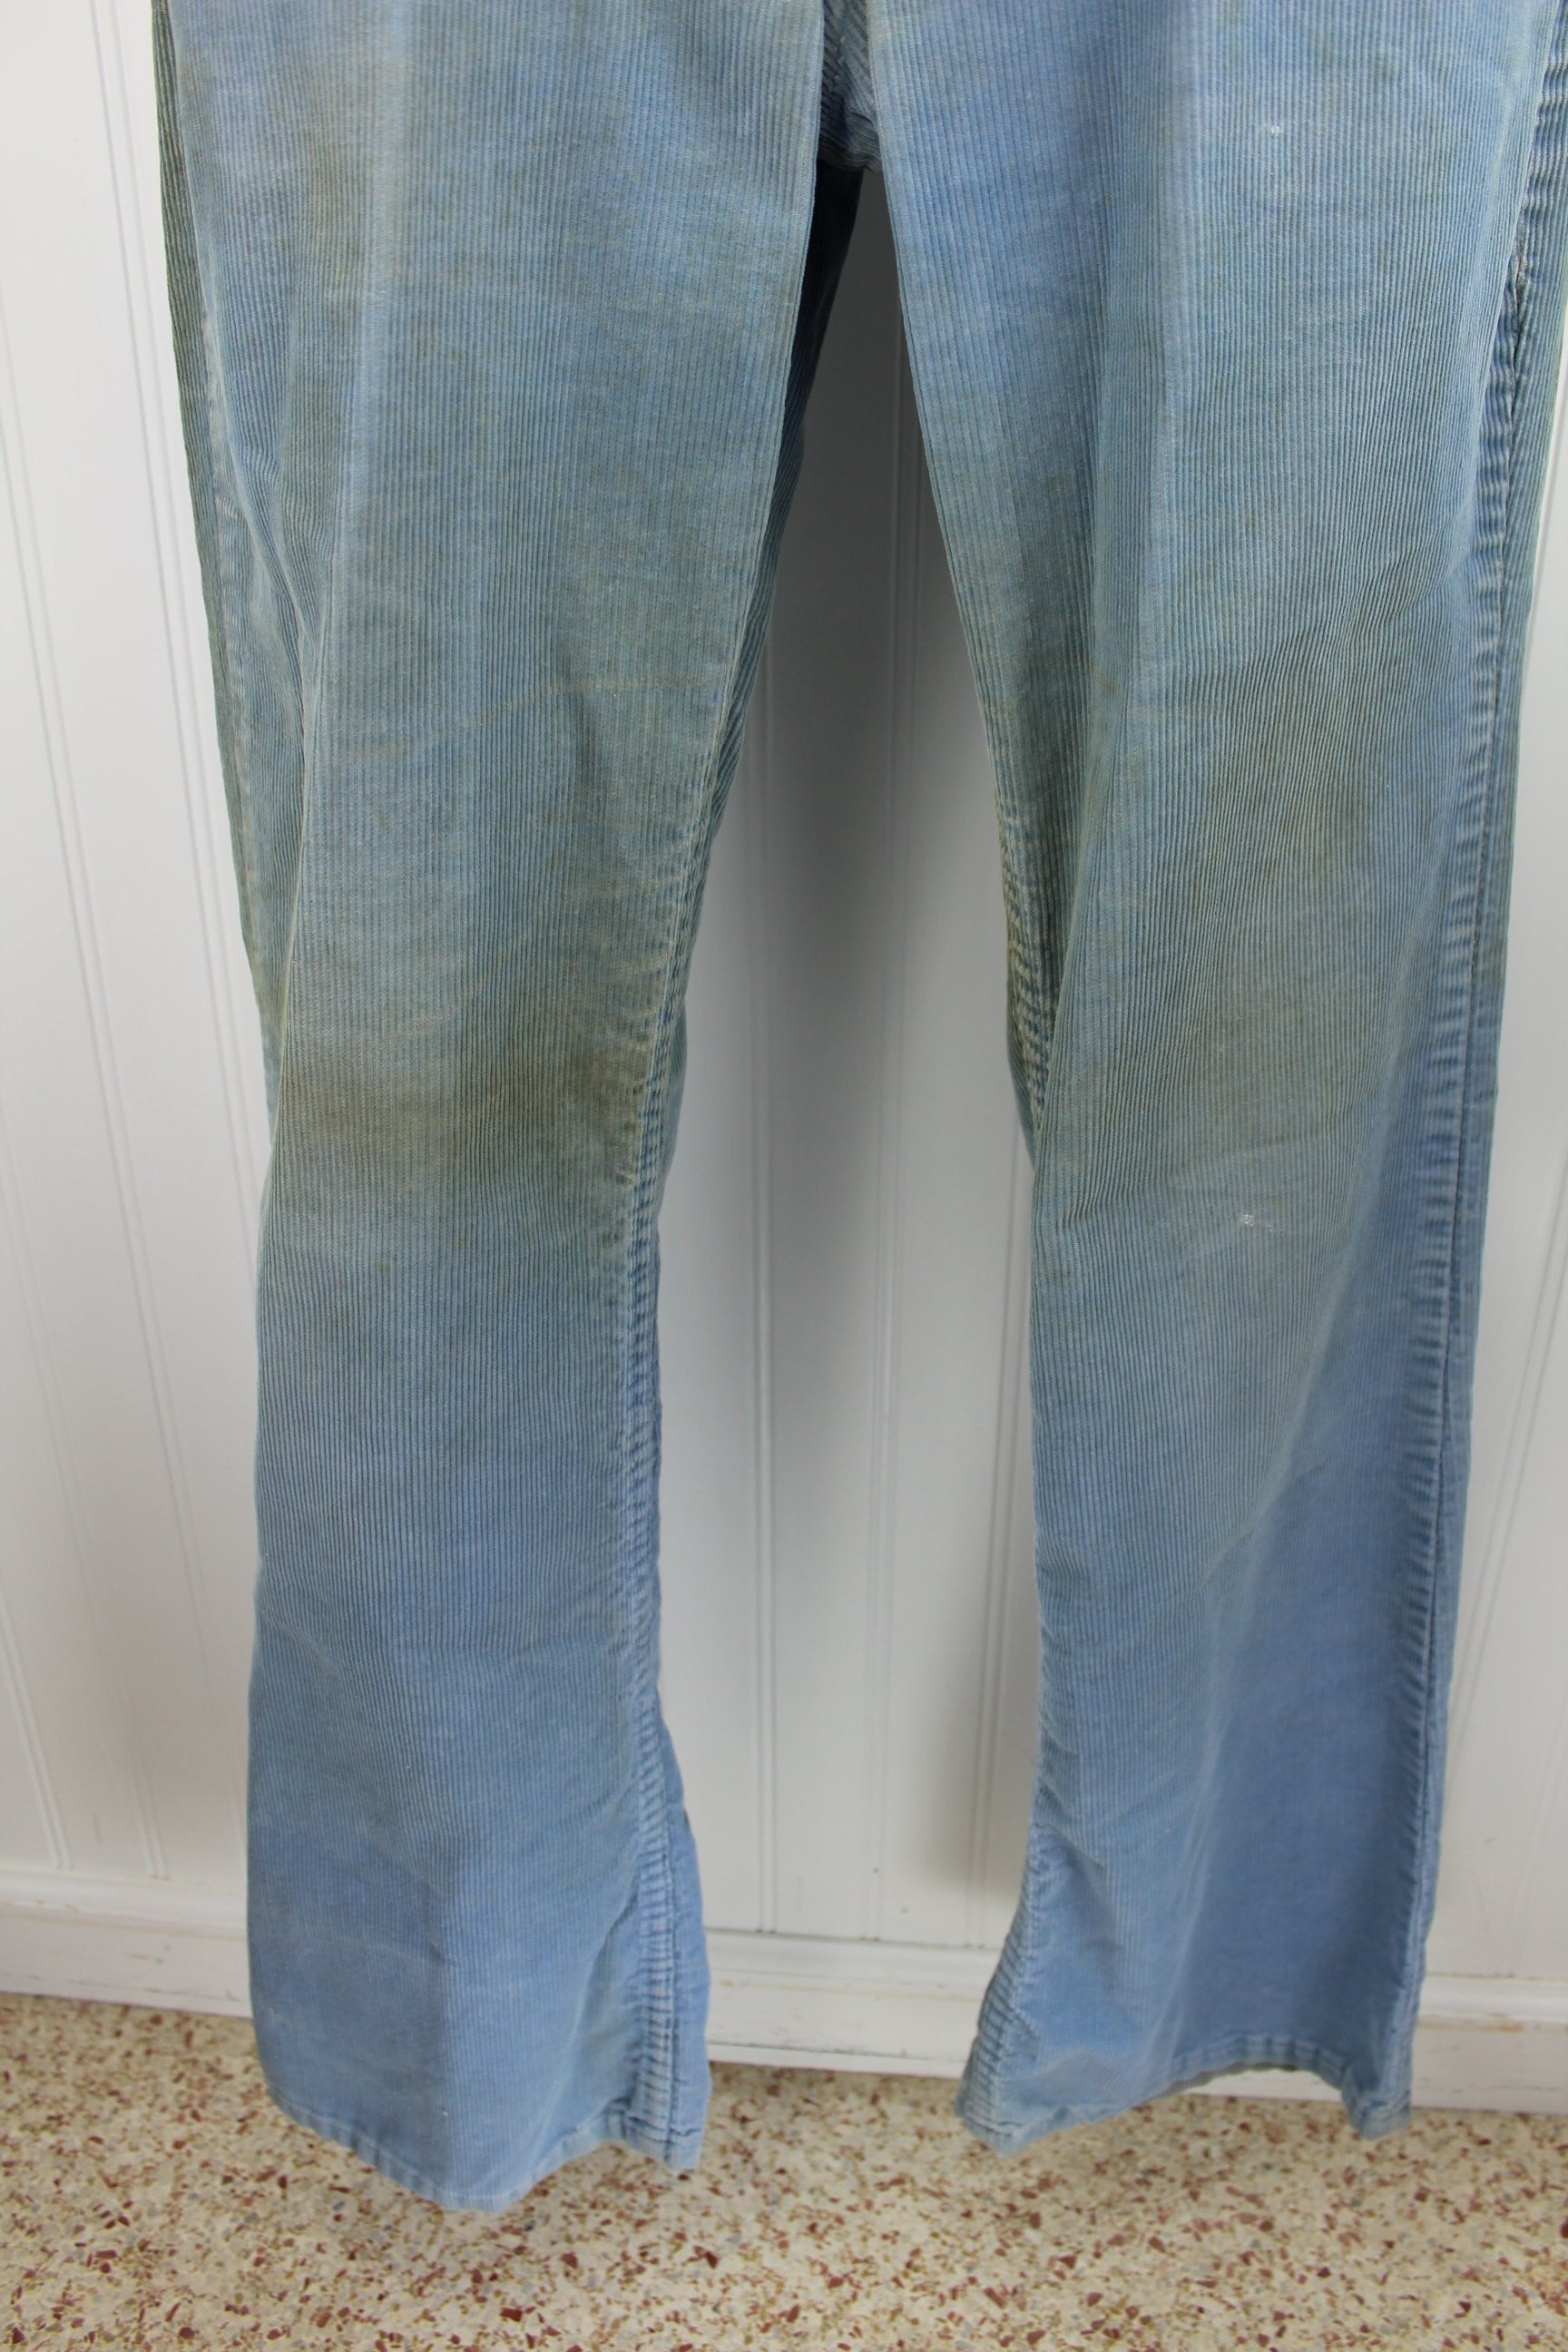 Vintage Levi's Skate Boarder Distressed Blue Cord Jeans 517 - Early 1990s - White Tab florida boarder skater